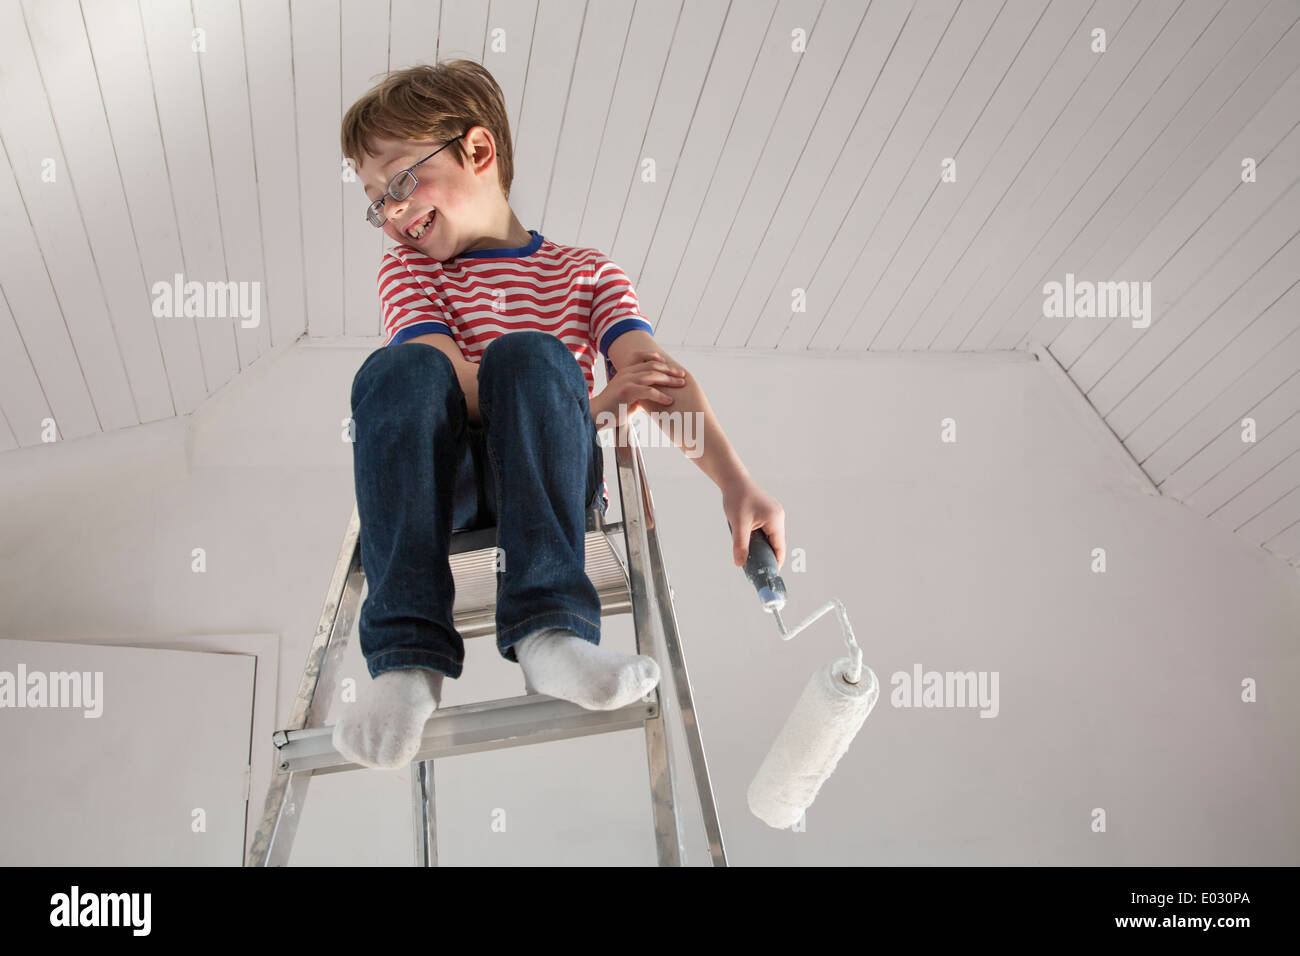 A boy seated on a stepladder. Stock Photo